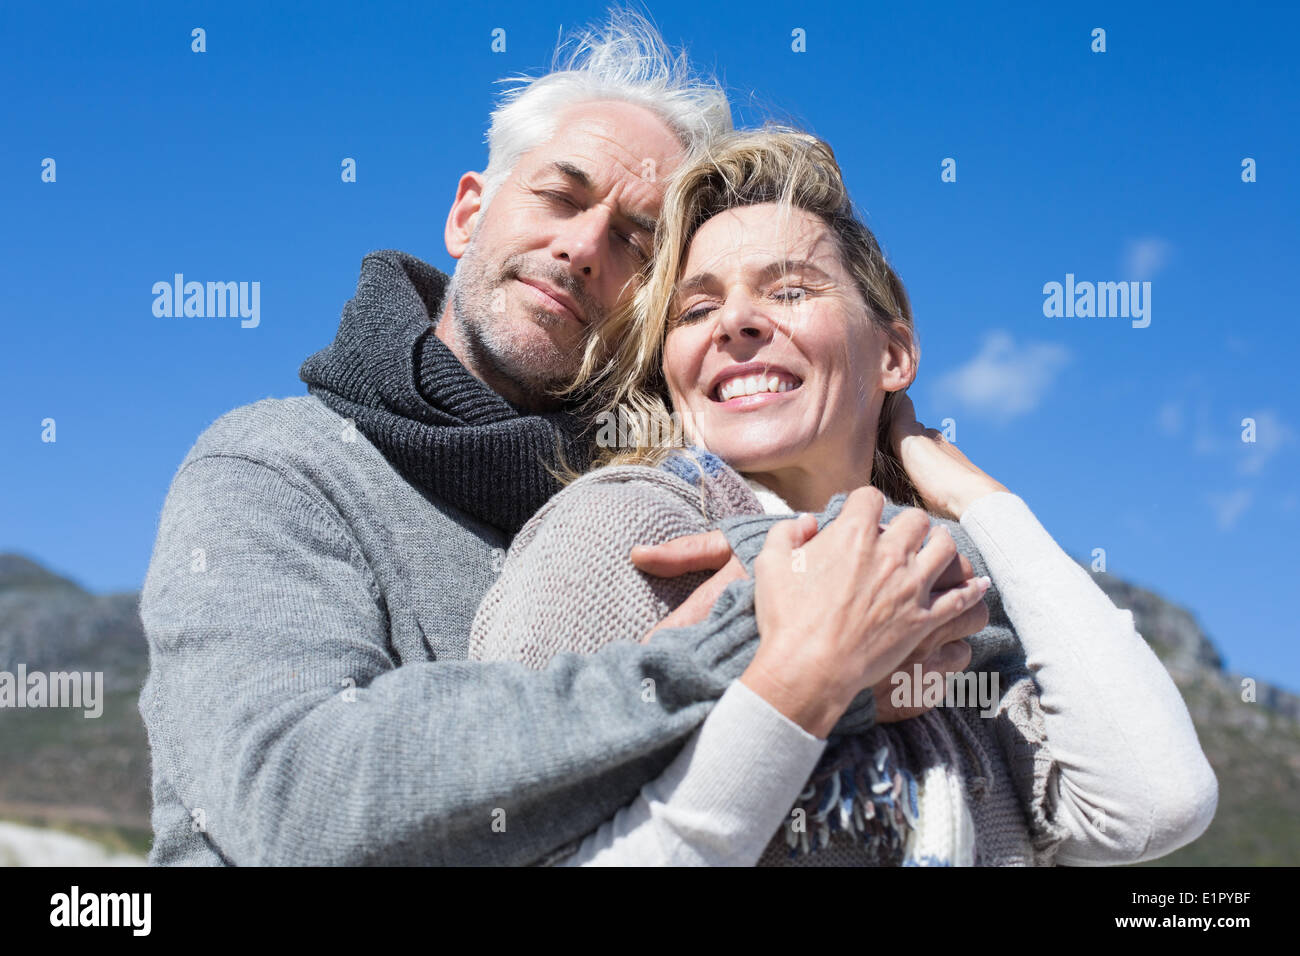 Carefree couple hugging in warm clothing Stock Photo